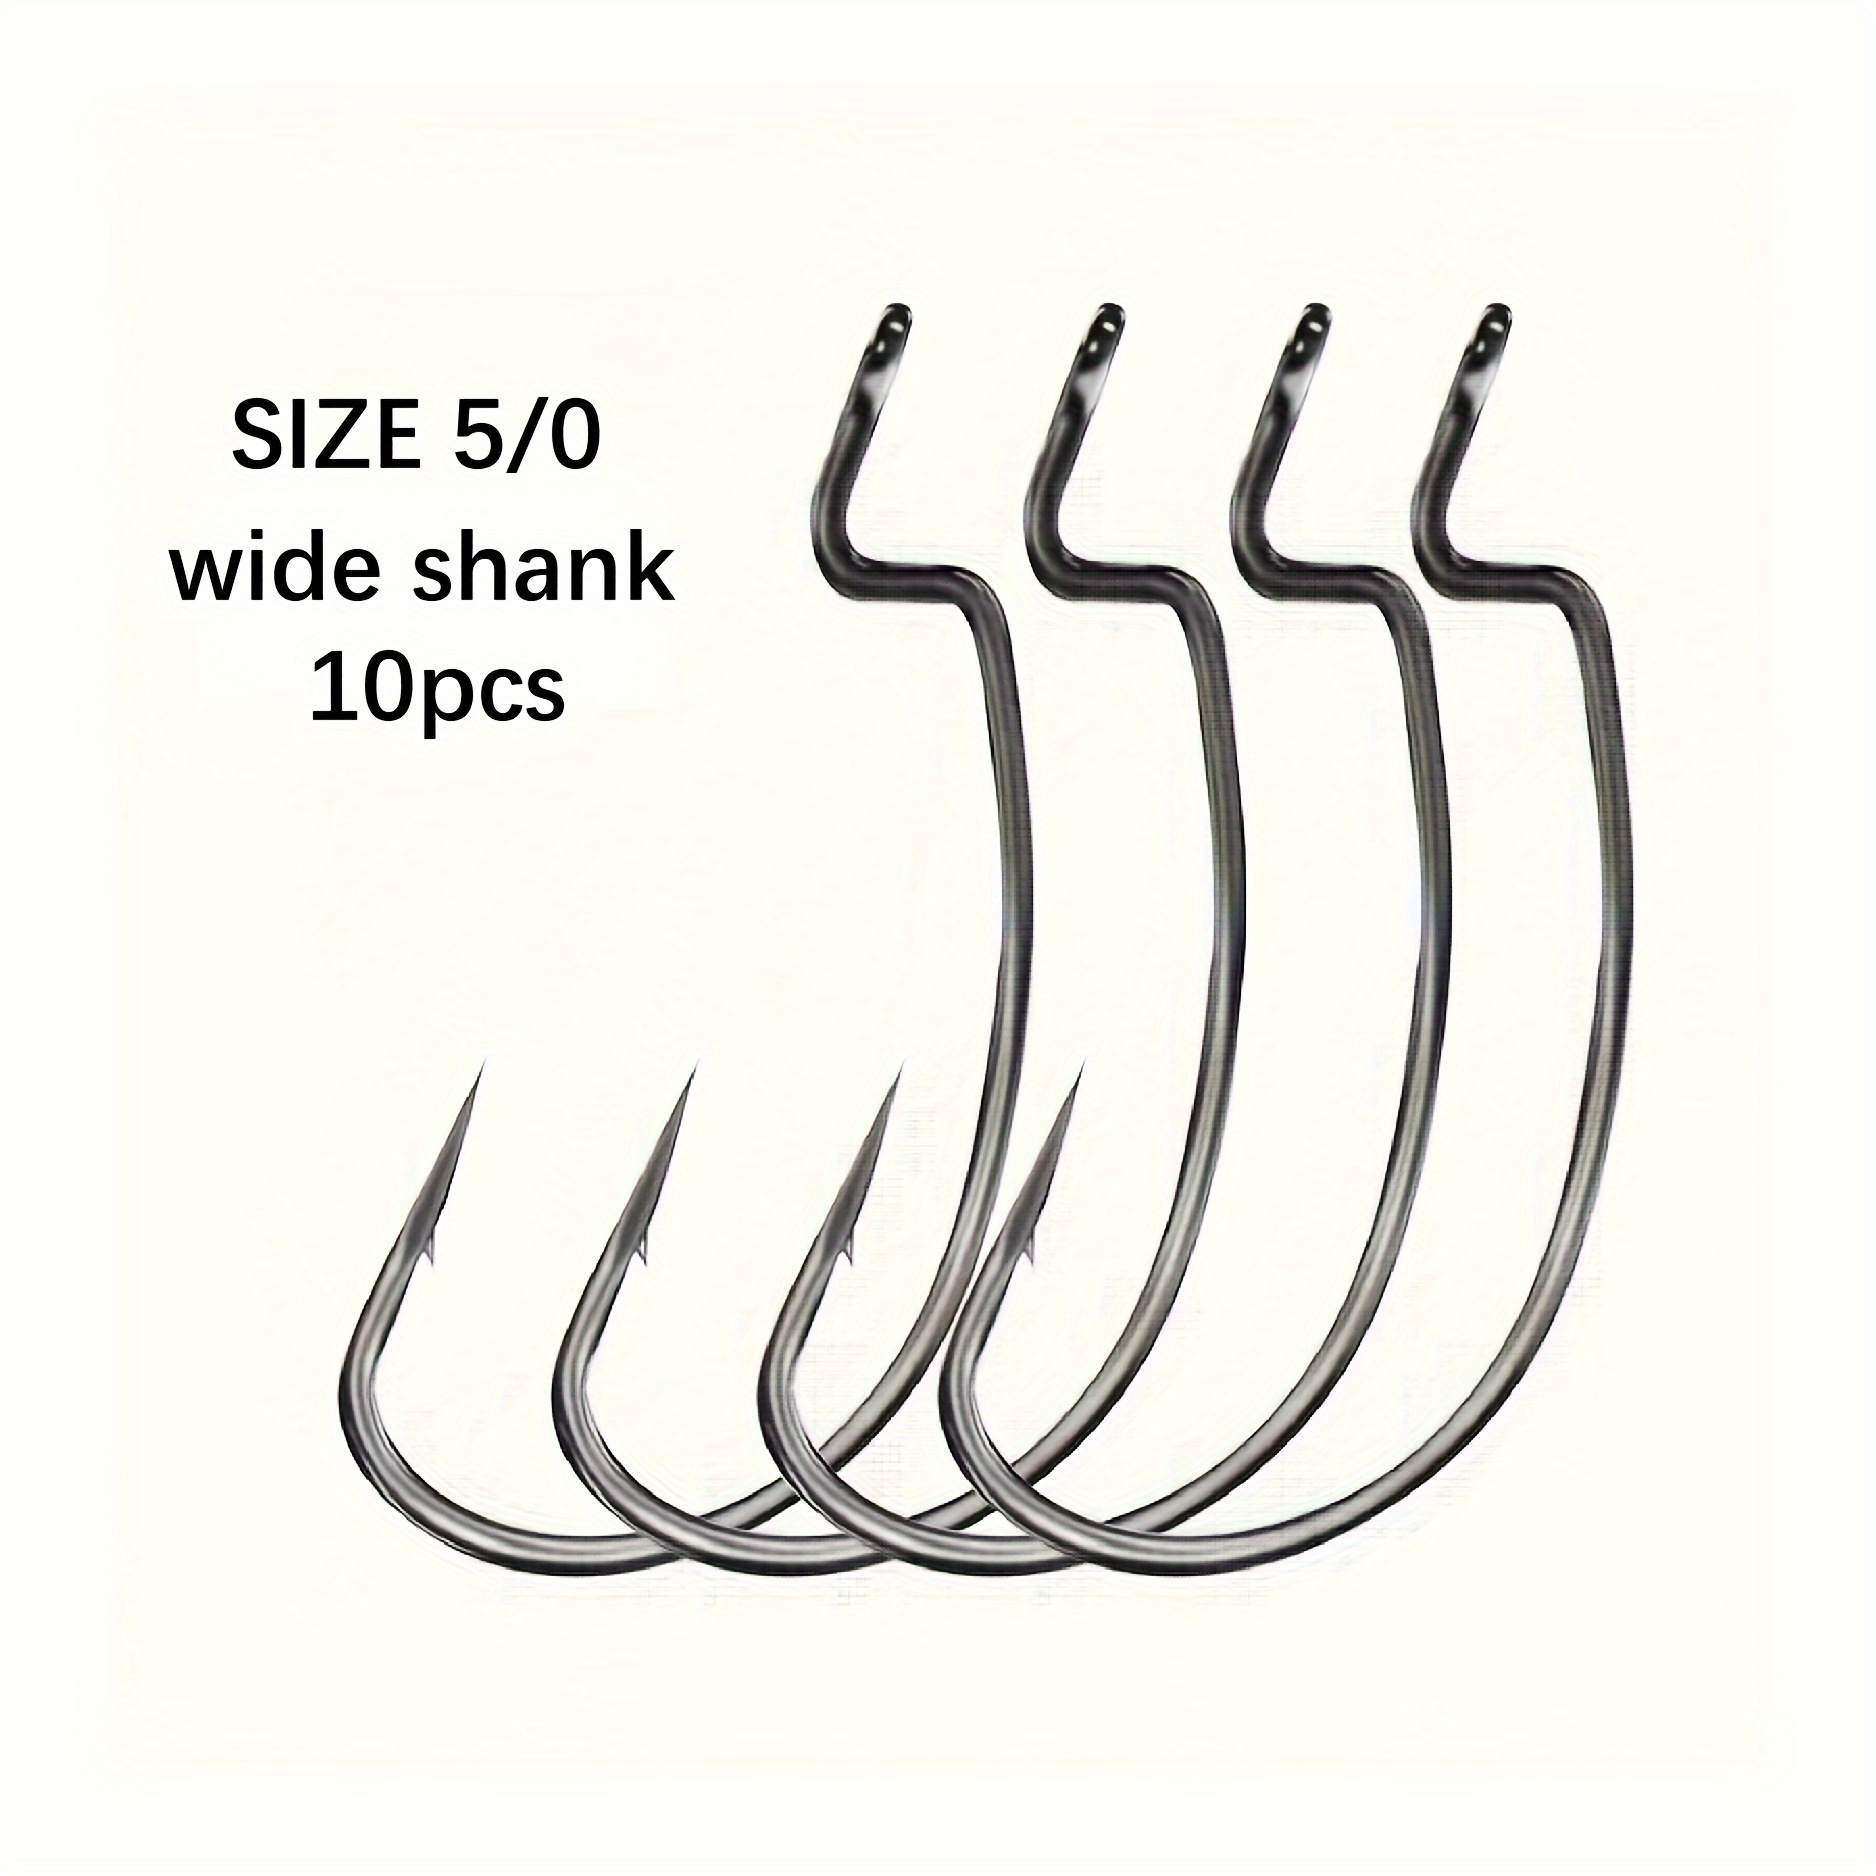 10pcs High Carbon Steel Offset Hooks, Barbed Fishing Hooks For Bass Trout,  Jigging Worm Hooks, Fishing Tackle For Saltwater Freshwater